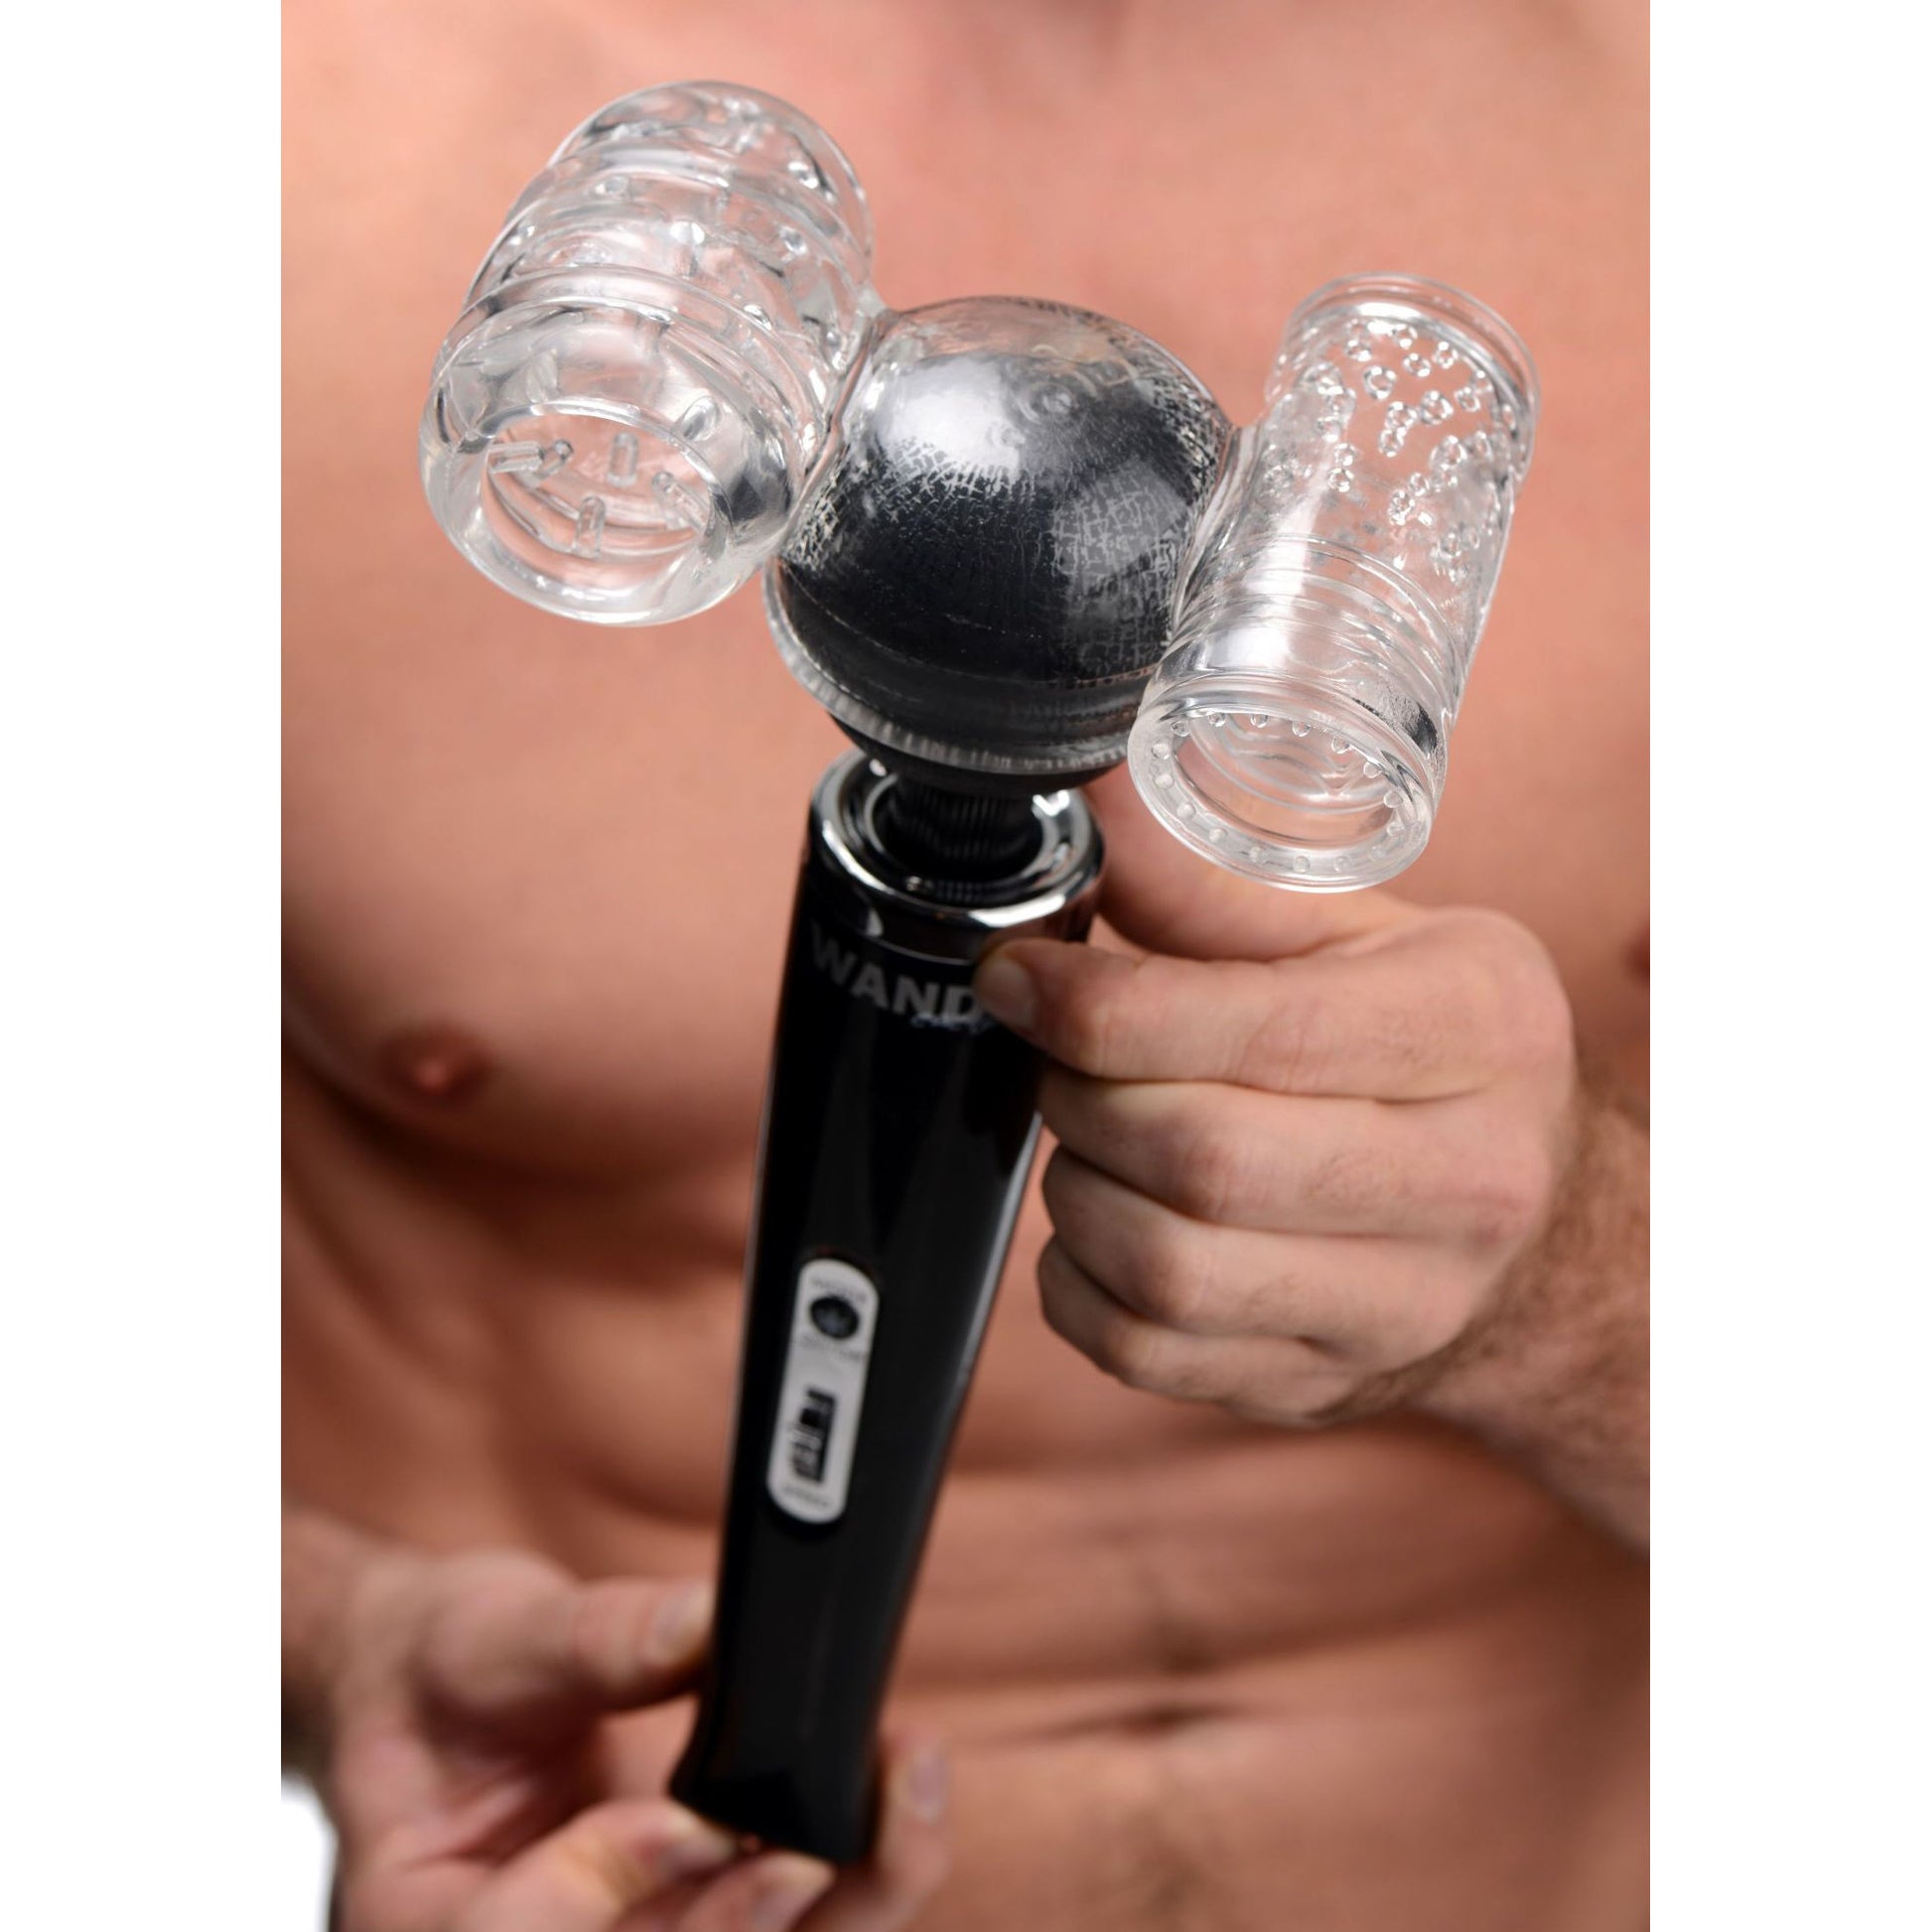 Twin Turbo Strokers 2 in 1 Wand Attachment for Men - UABDSM